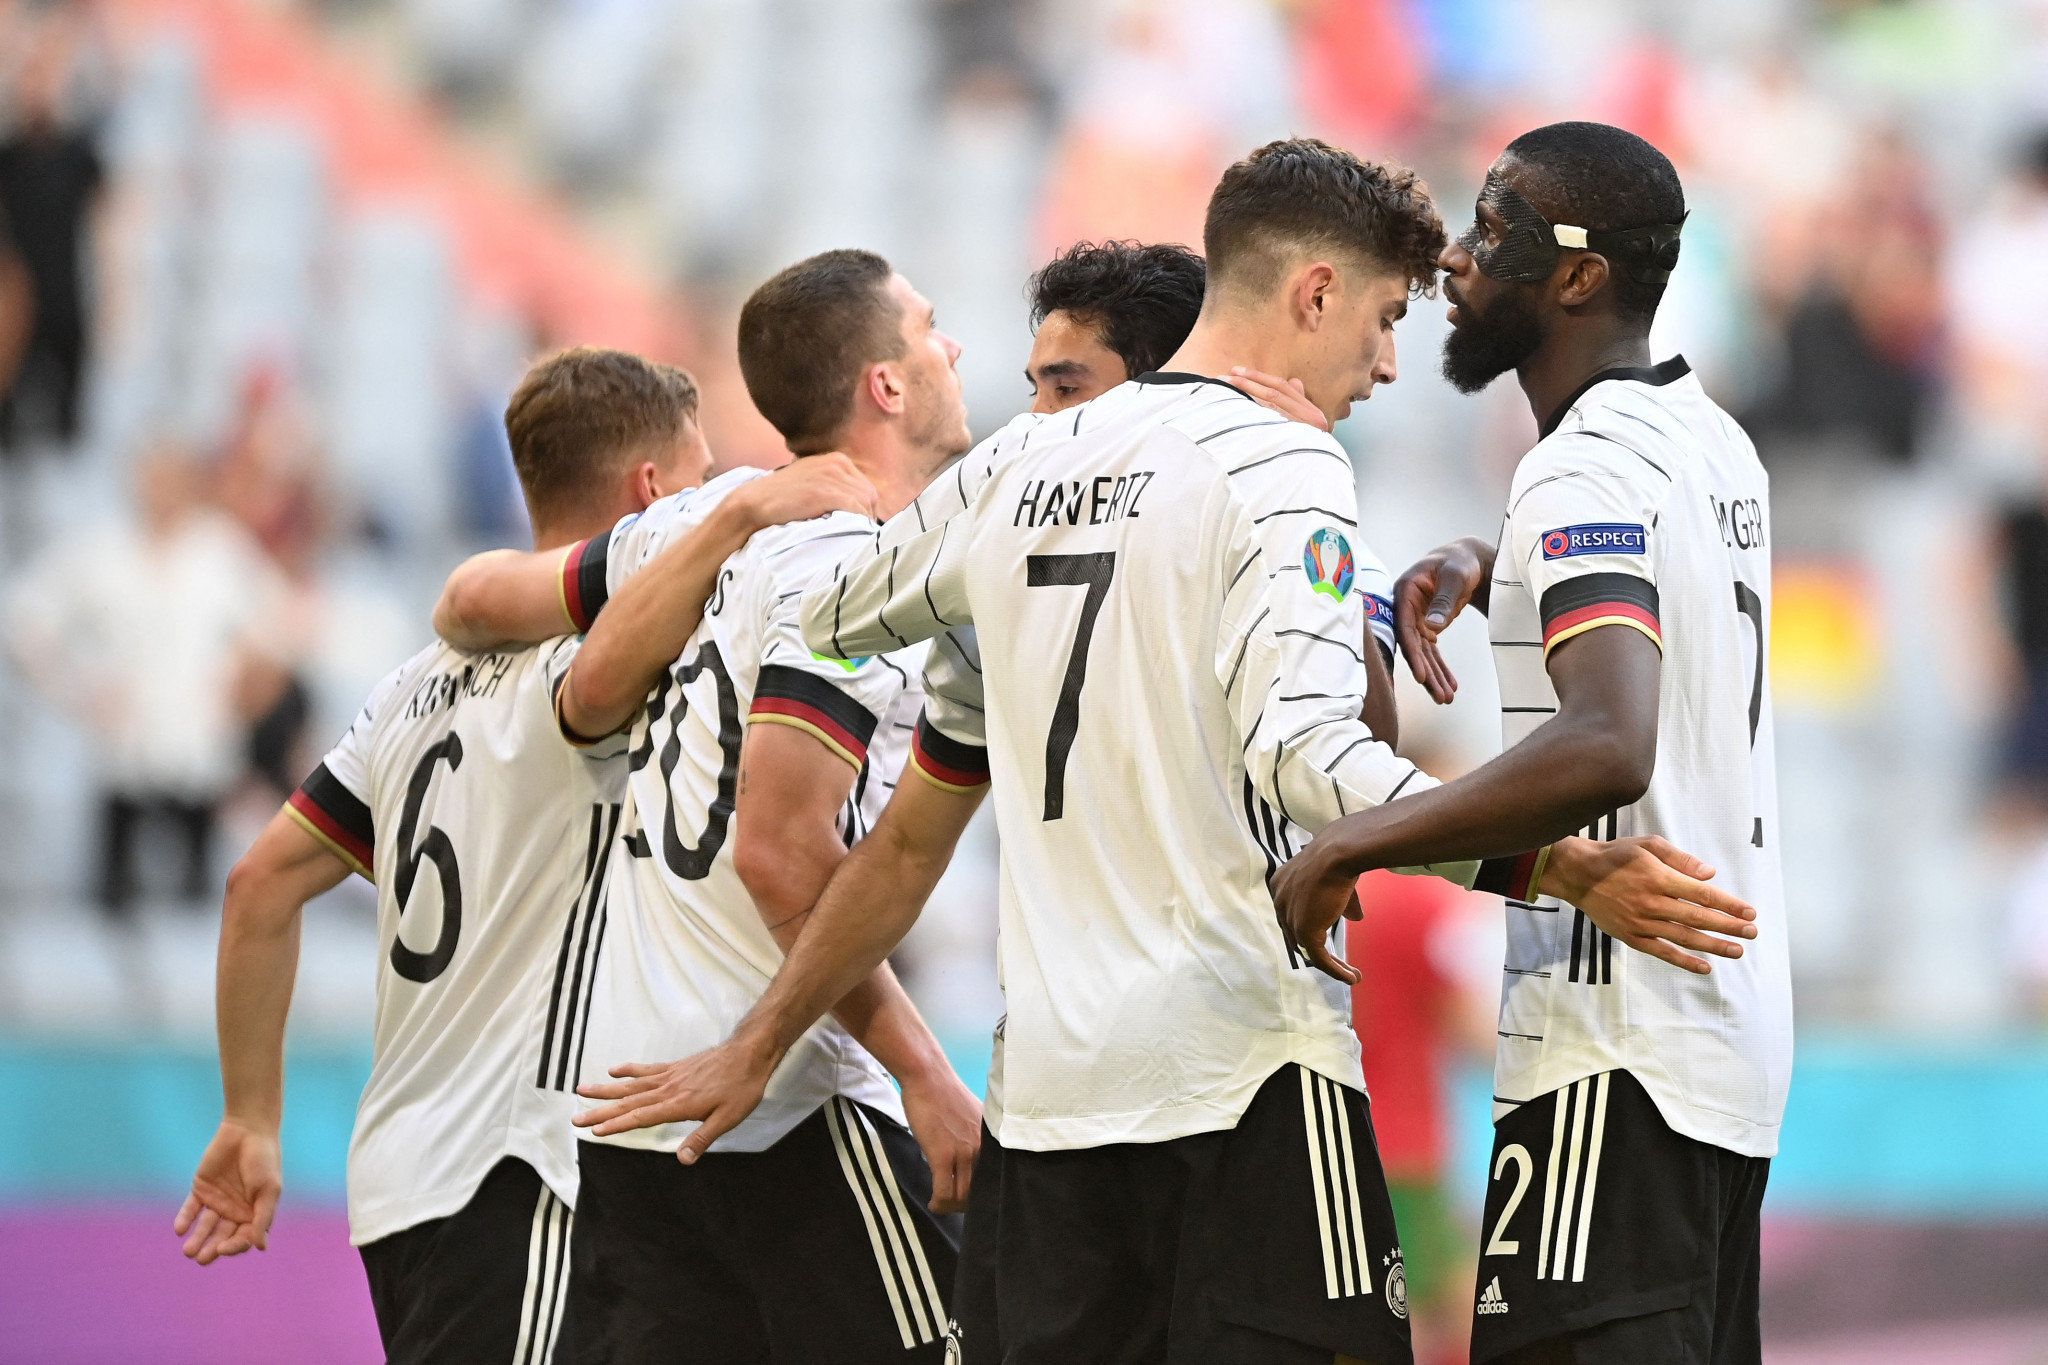 Germany put four past defending champions Portugal as Spain held again at Euro 2020